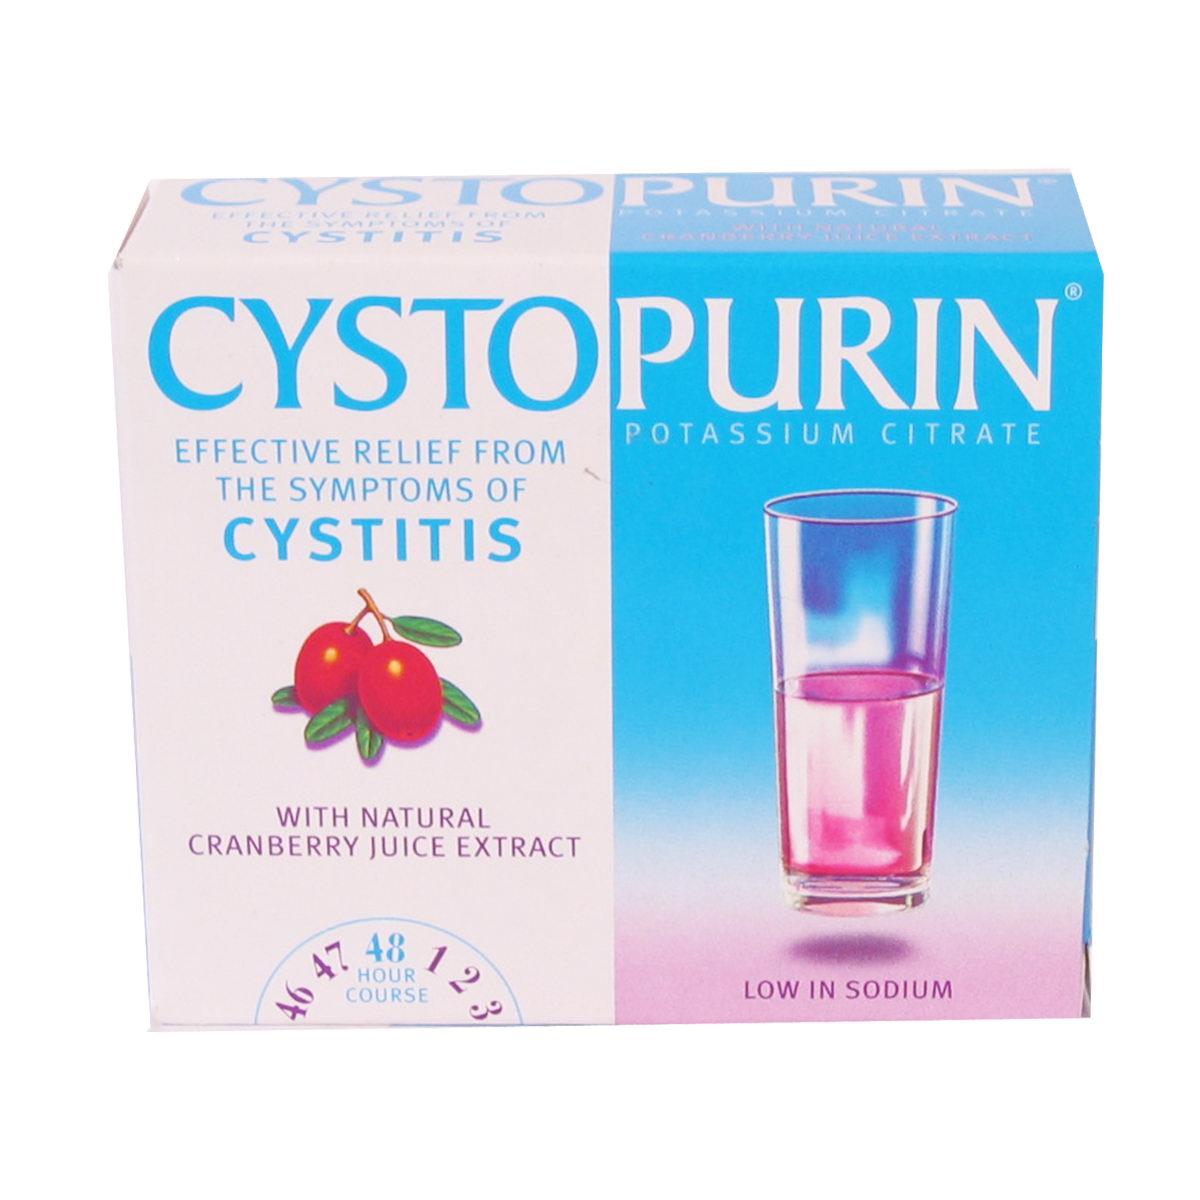 cystropurin oral solution potasium citrate